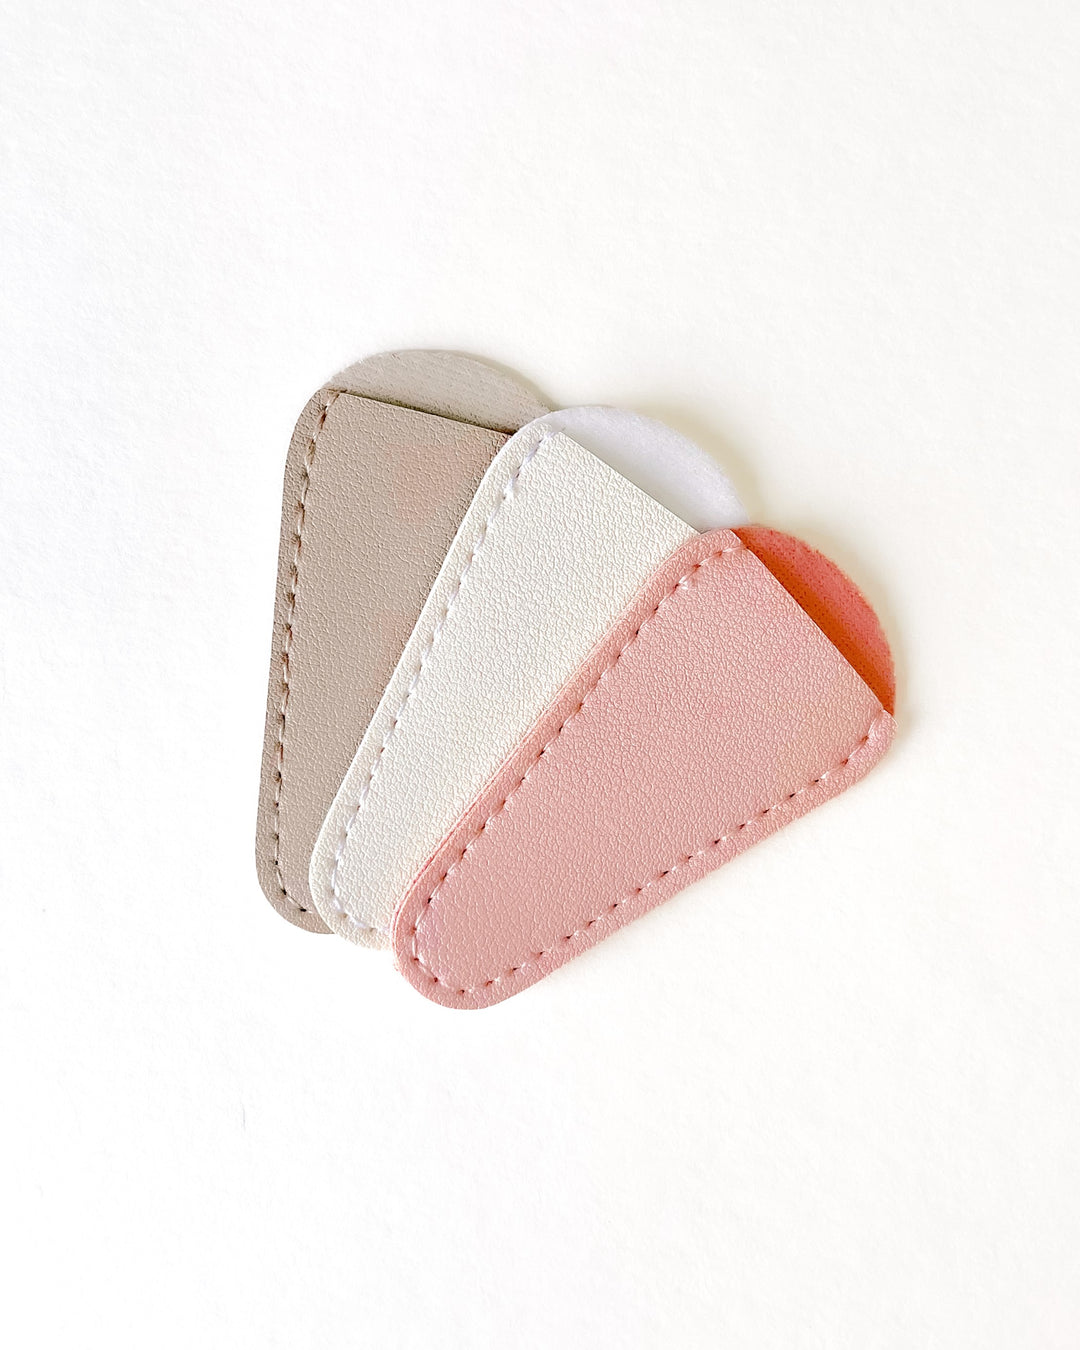 Embroidery Scissors Protective Case by Unwind Studio